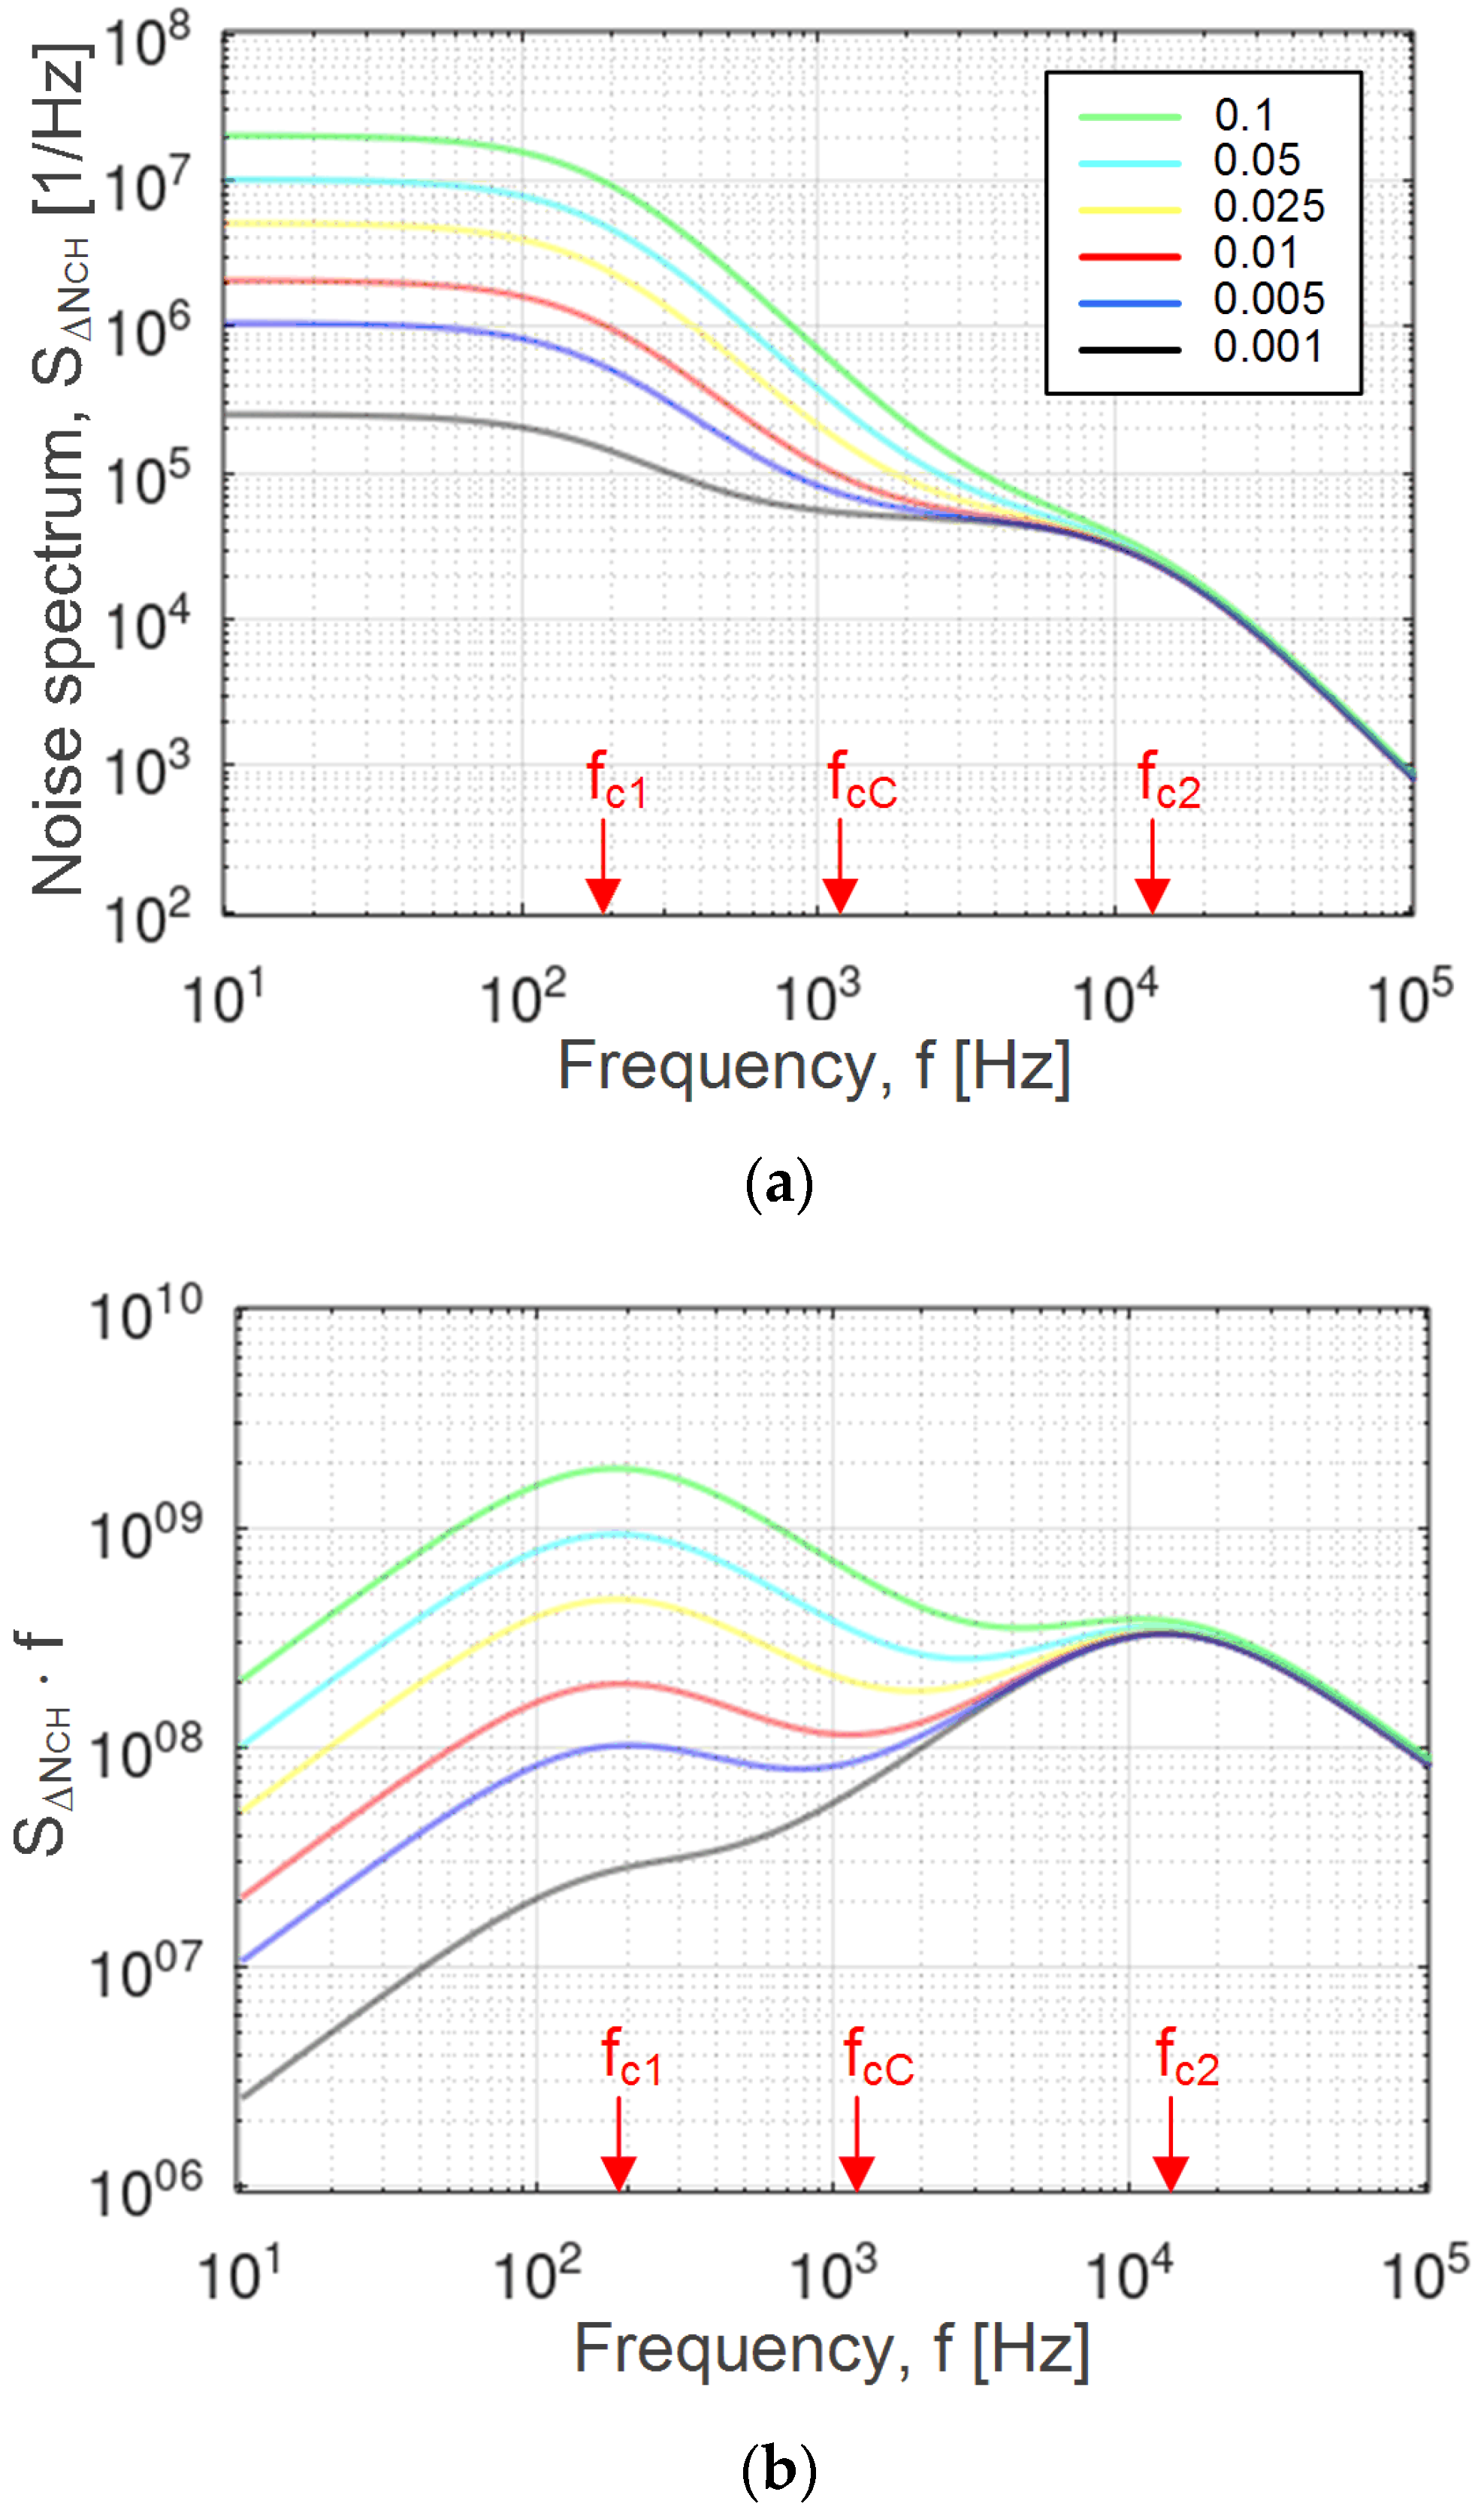 Chemosensors | Free Full-Text | Noise Spectrum as a Source of ...